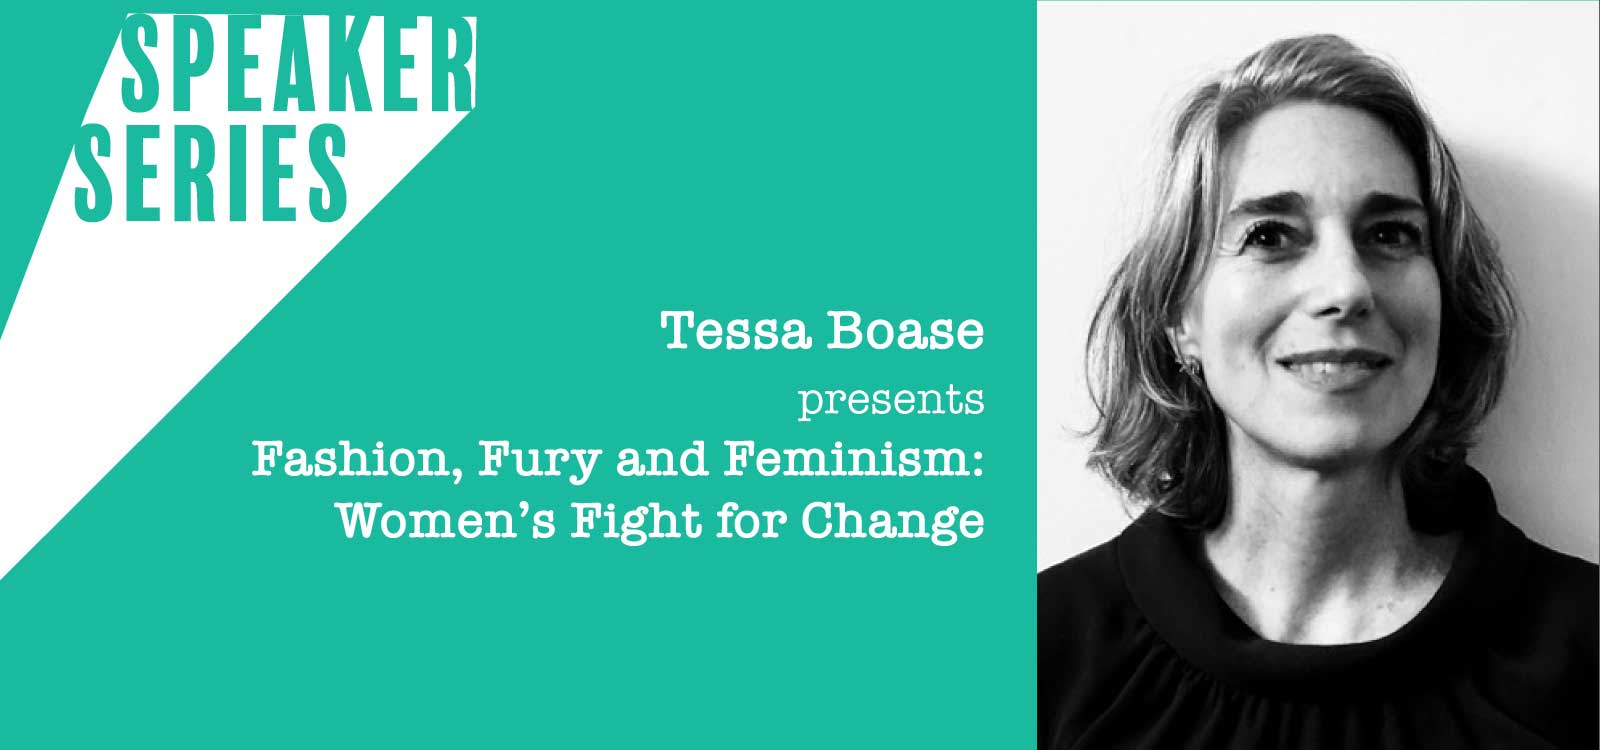 Speaker Series with Tessa Boase for Women's History Month